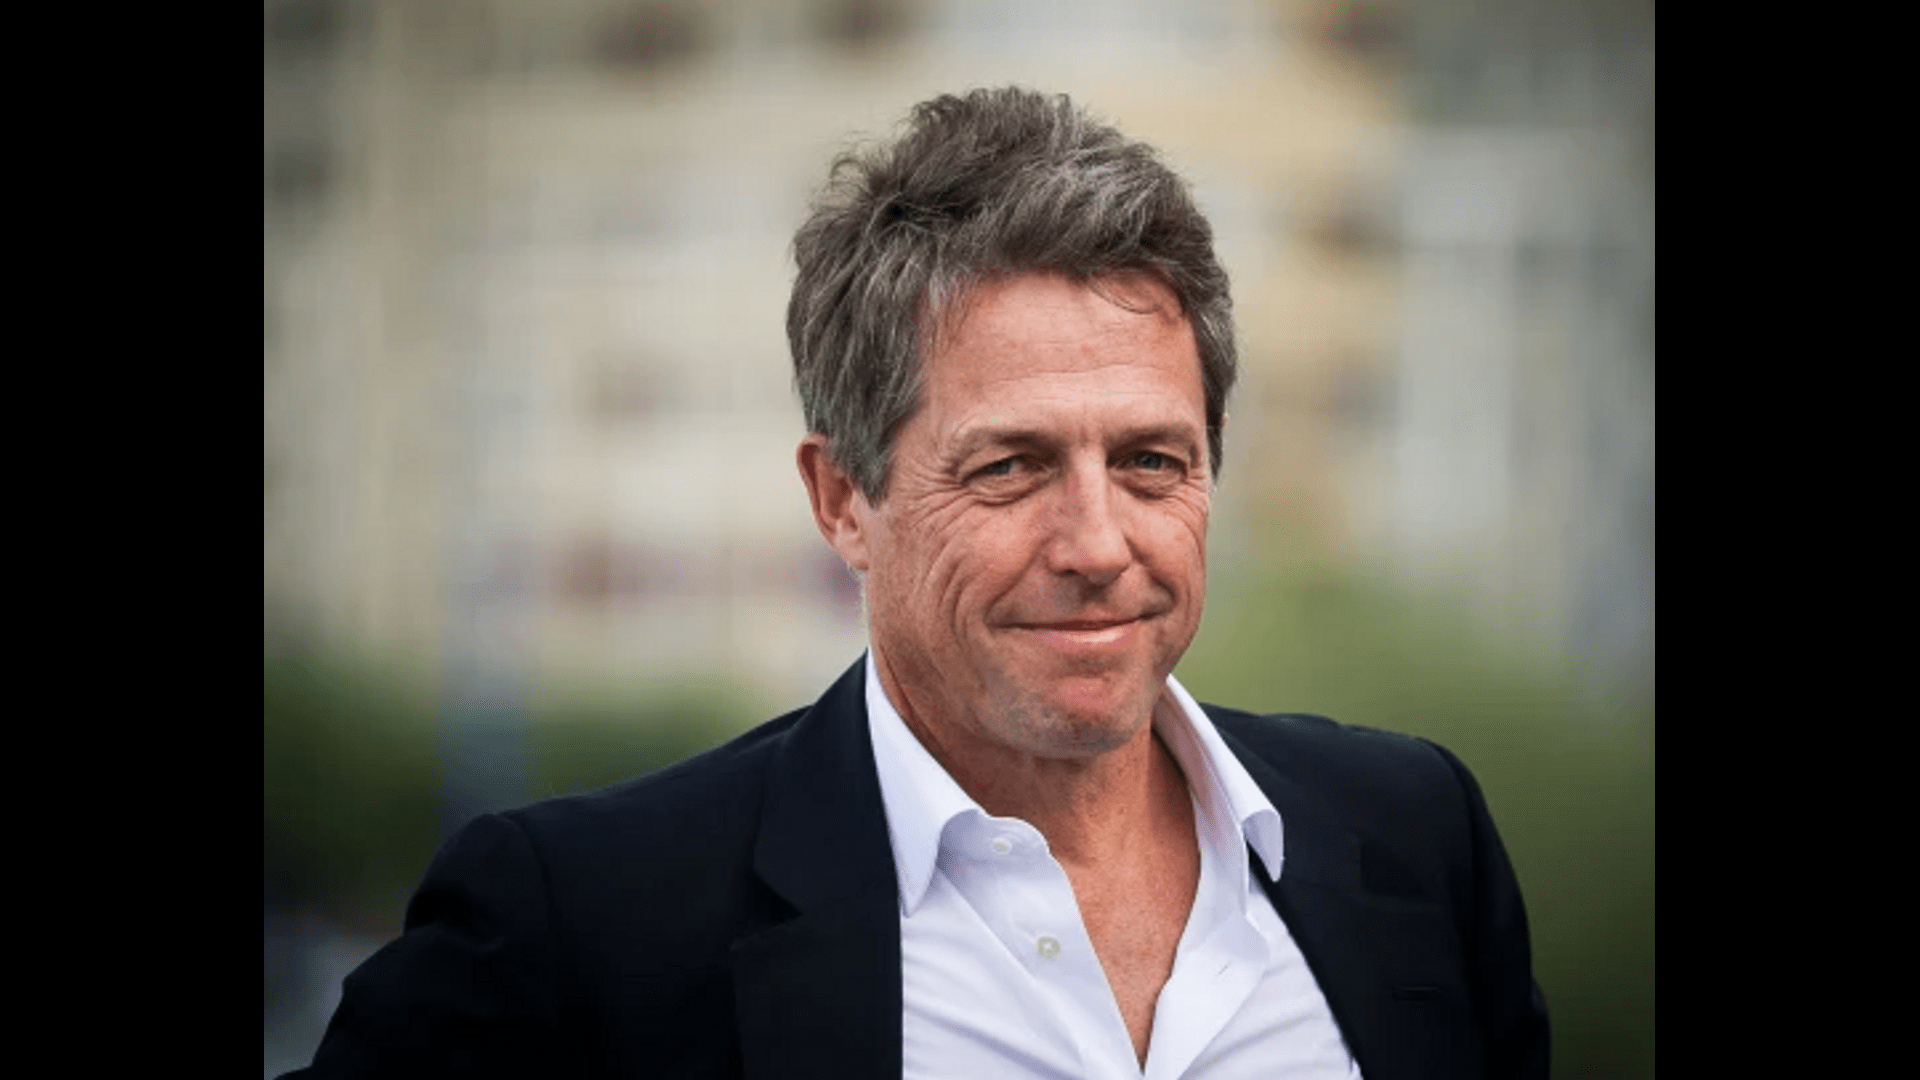 hugh-grant-accuses-journalists-of-hacking-his-phone